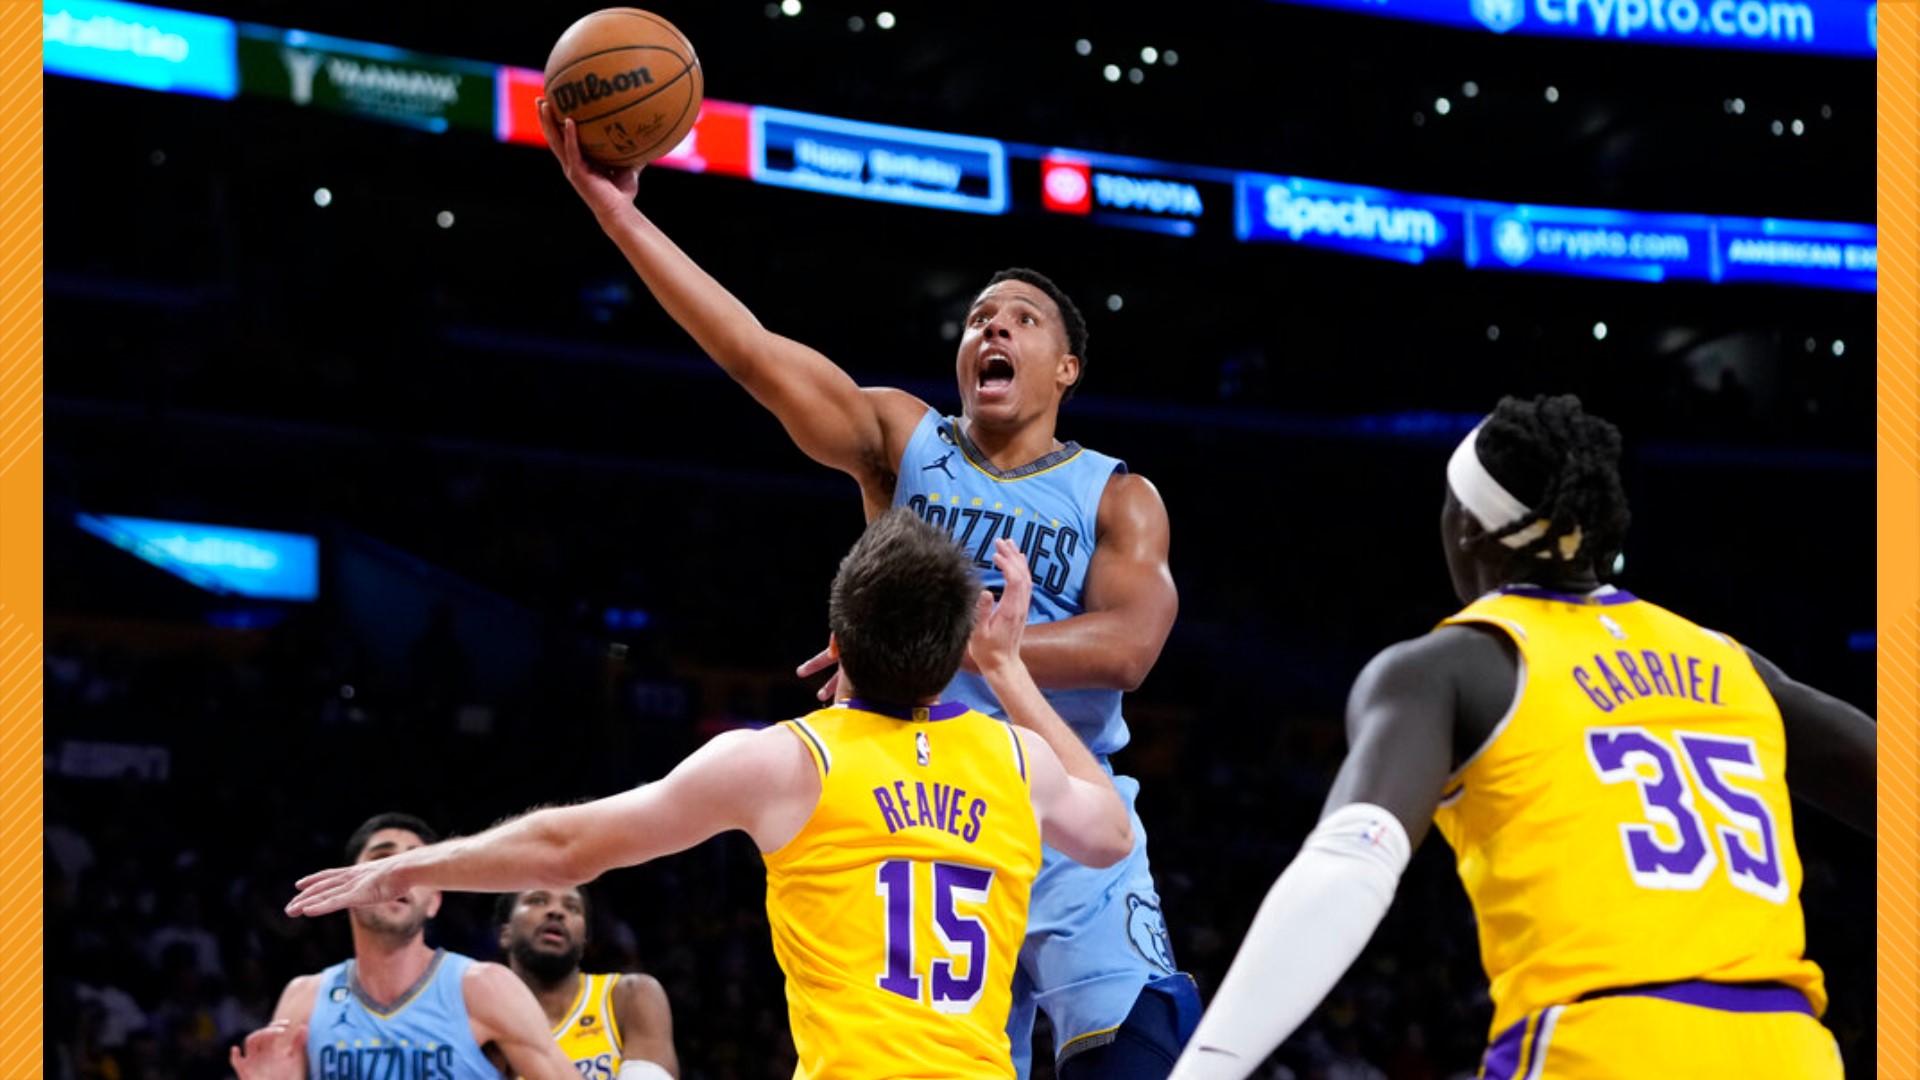 The first time the Grizz and Lakers will face off in the playoffs comes at a time when Memphis has faced turmoil for months, Otis Sanford says. We deserve a break.